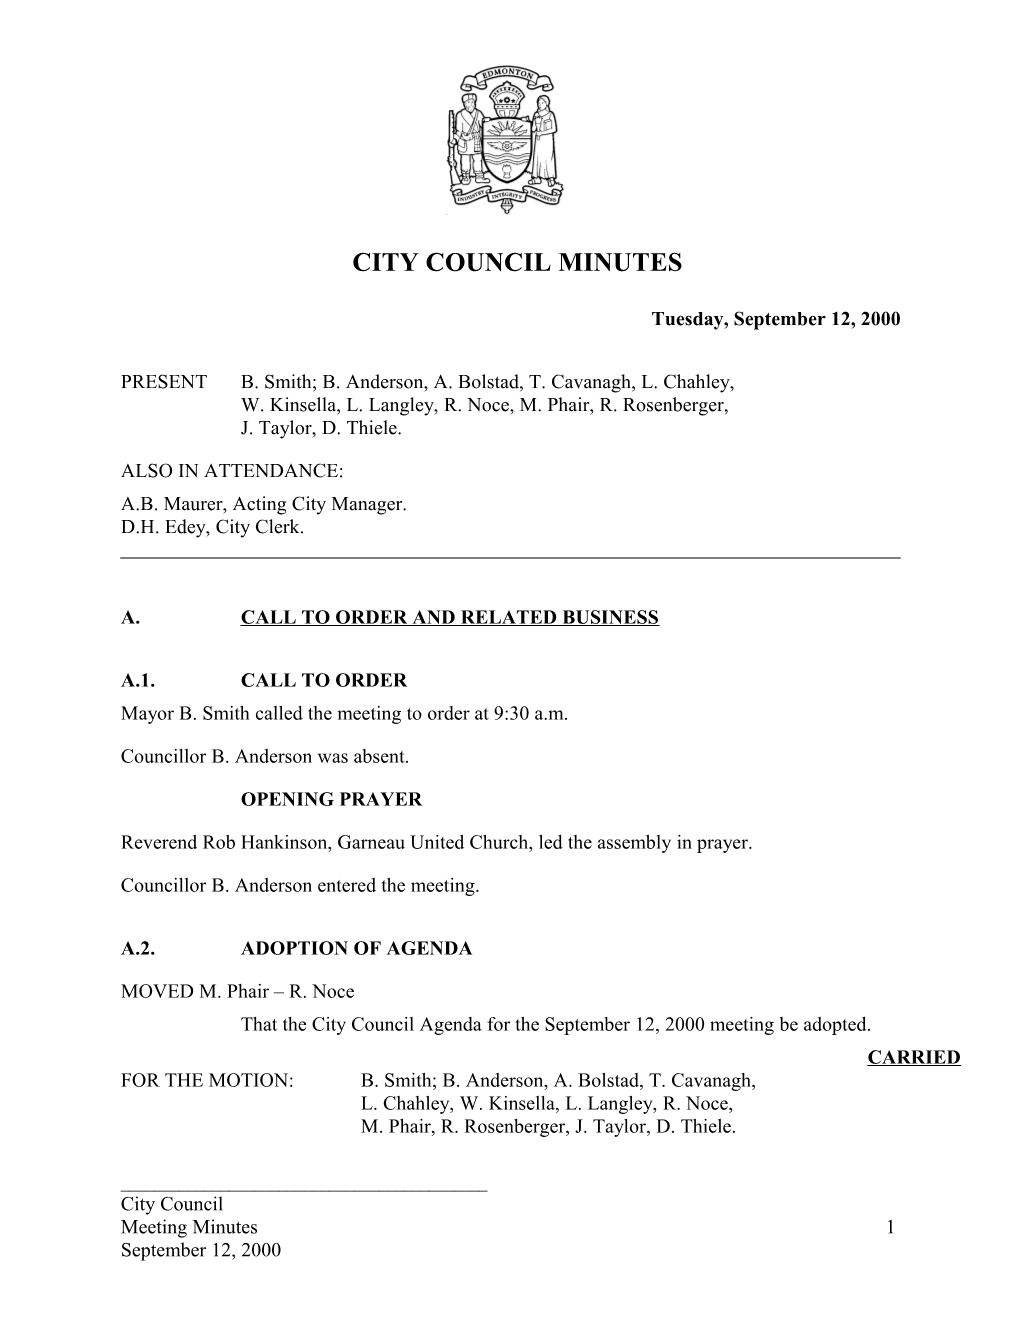 Minutes for City Council September 12, 2000 Meeting